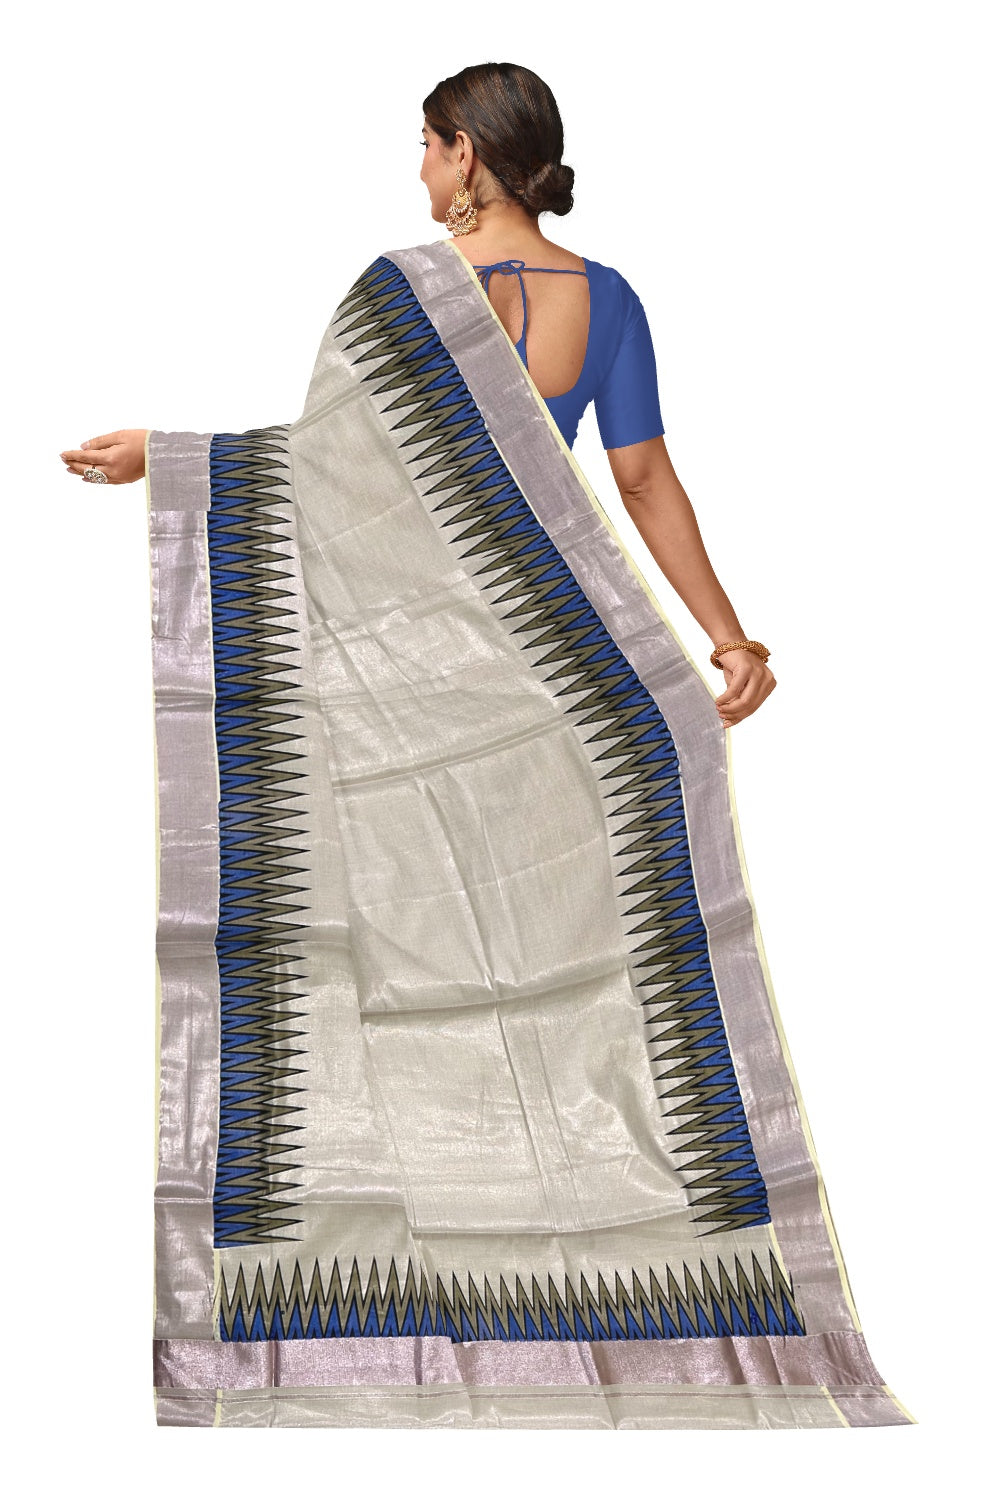 Kerala Rose Copper Tissue Kasavu Saree with Blue Brown Temple Prints across the border